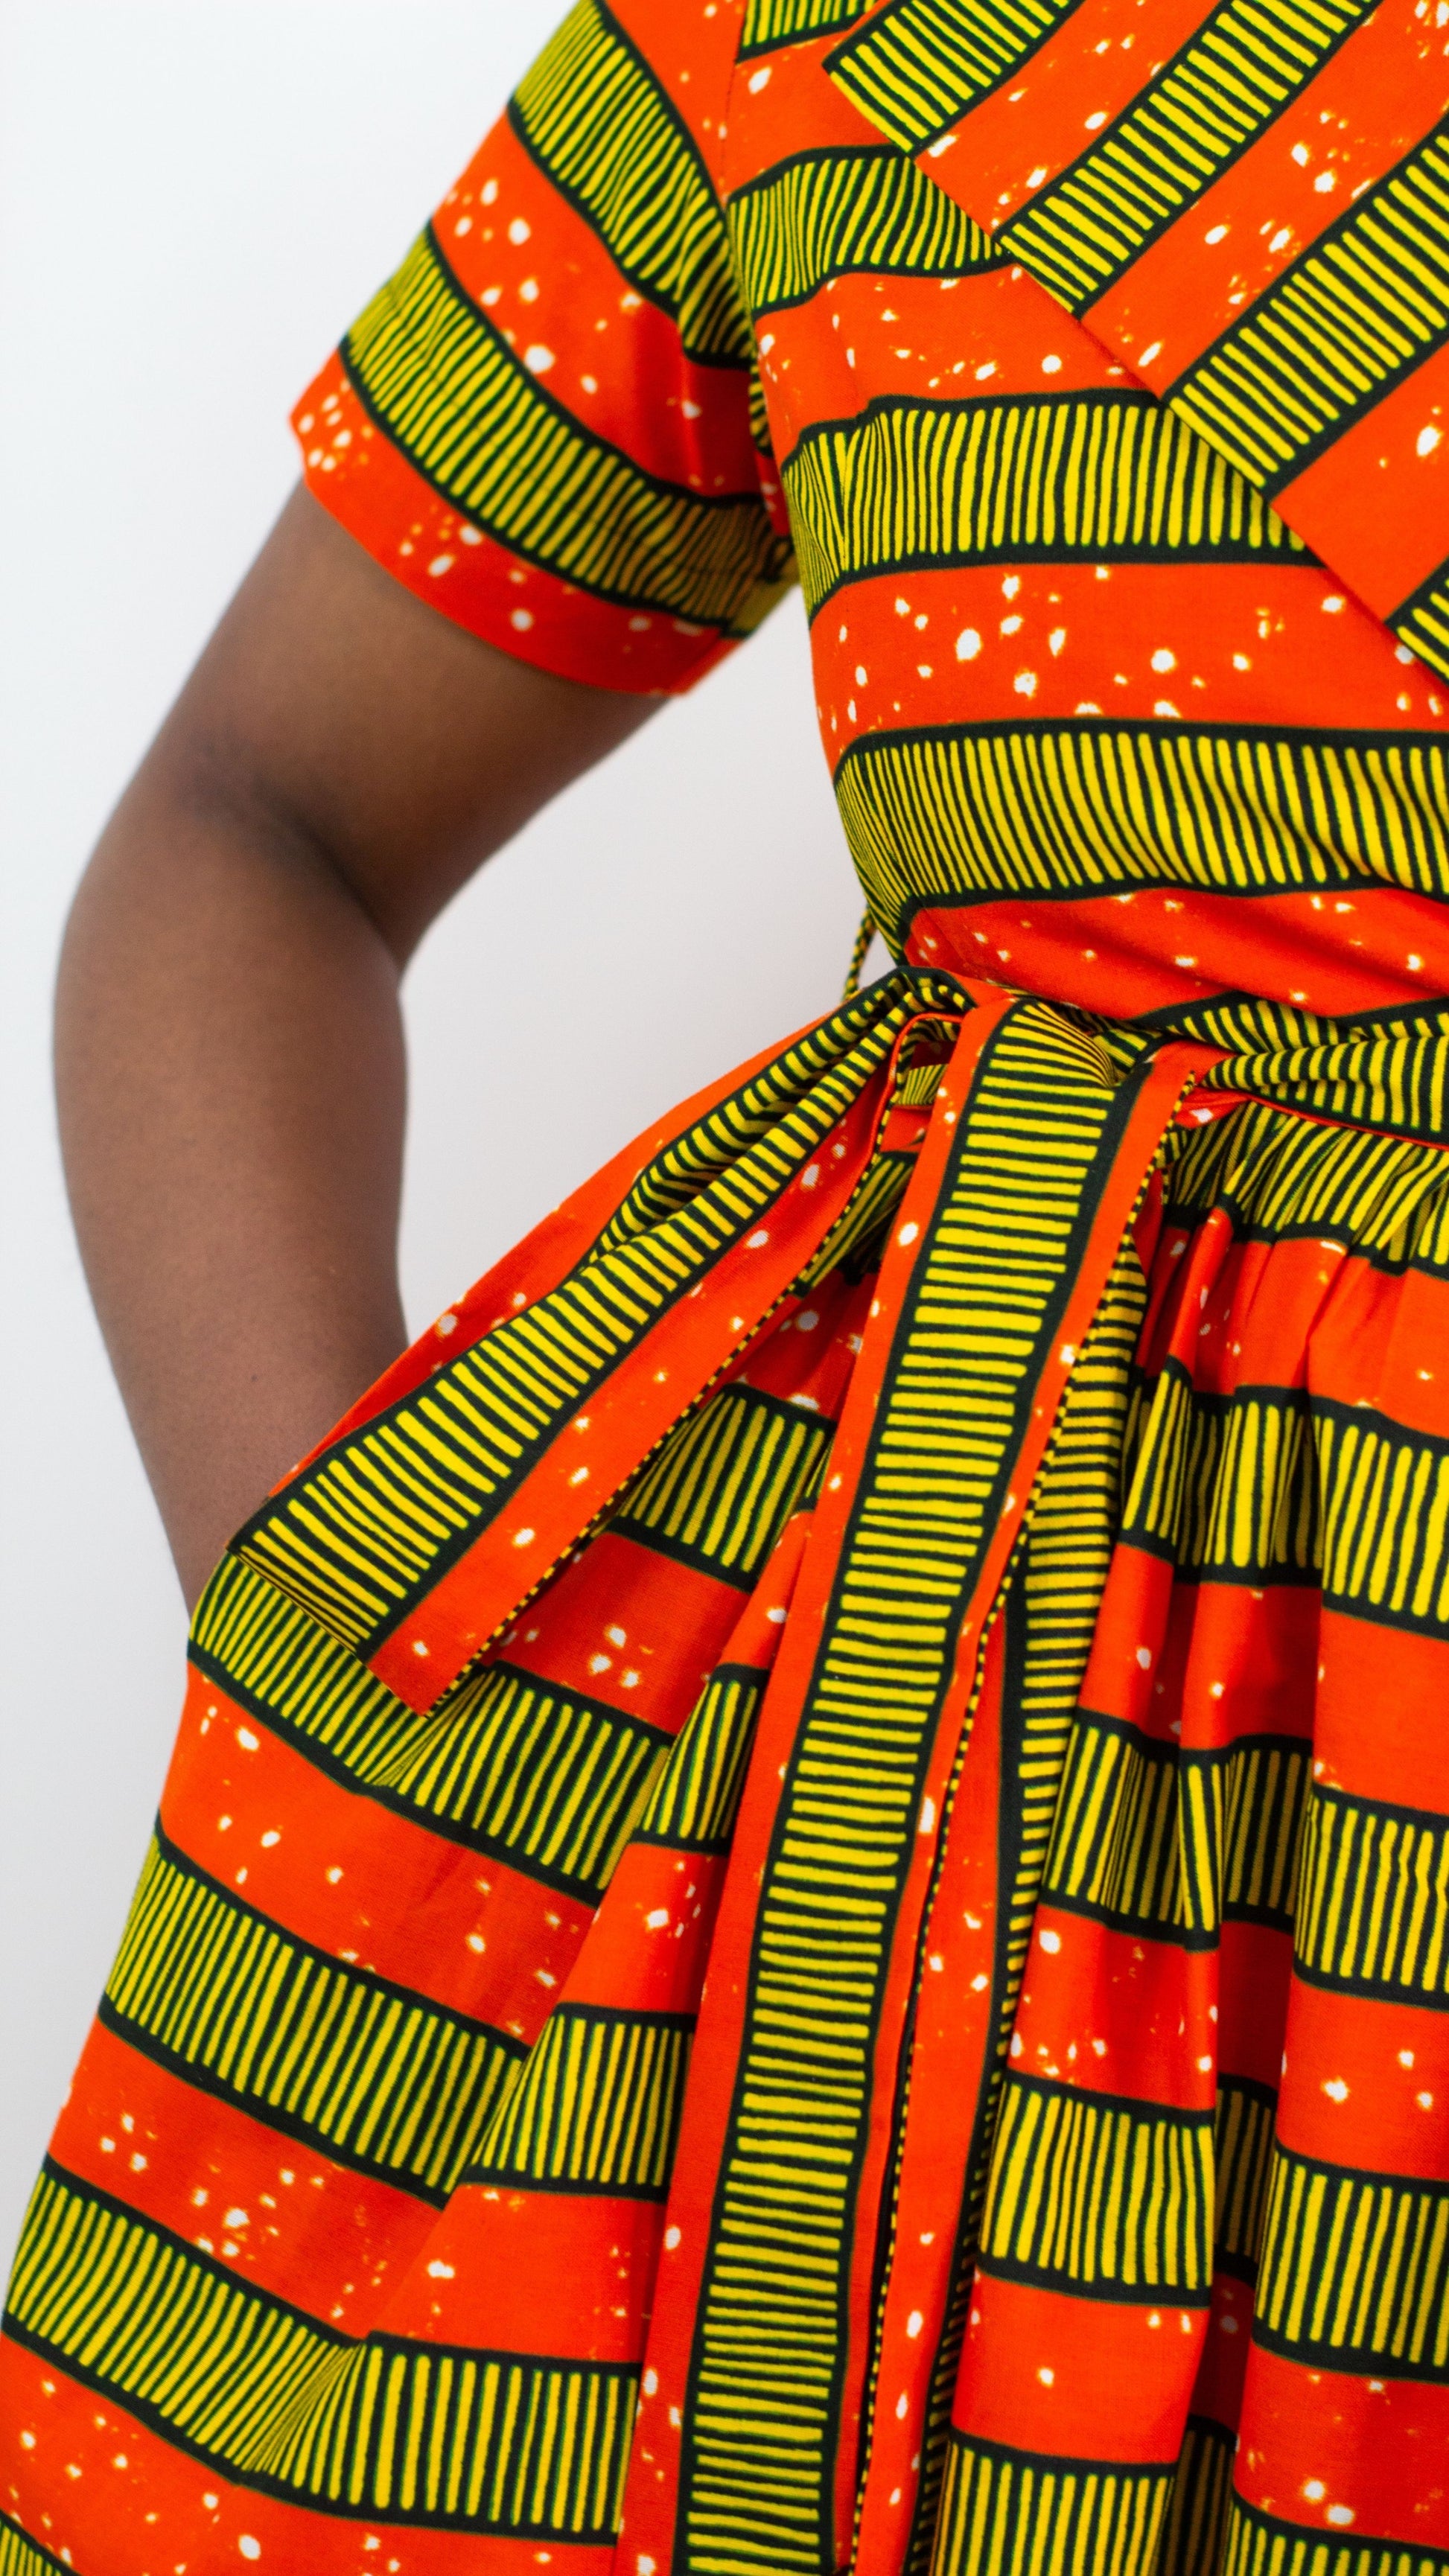 A captivating orange-yellow striped print dress featuring practical and stylish pockets. The combination of vibrant colours and functional design.